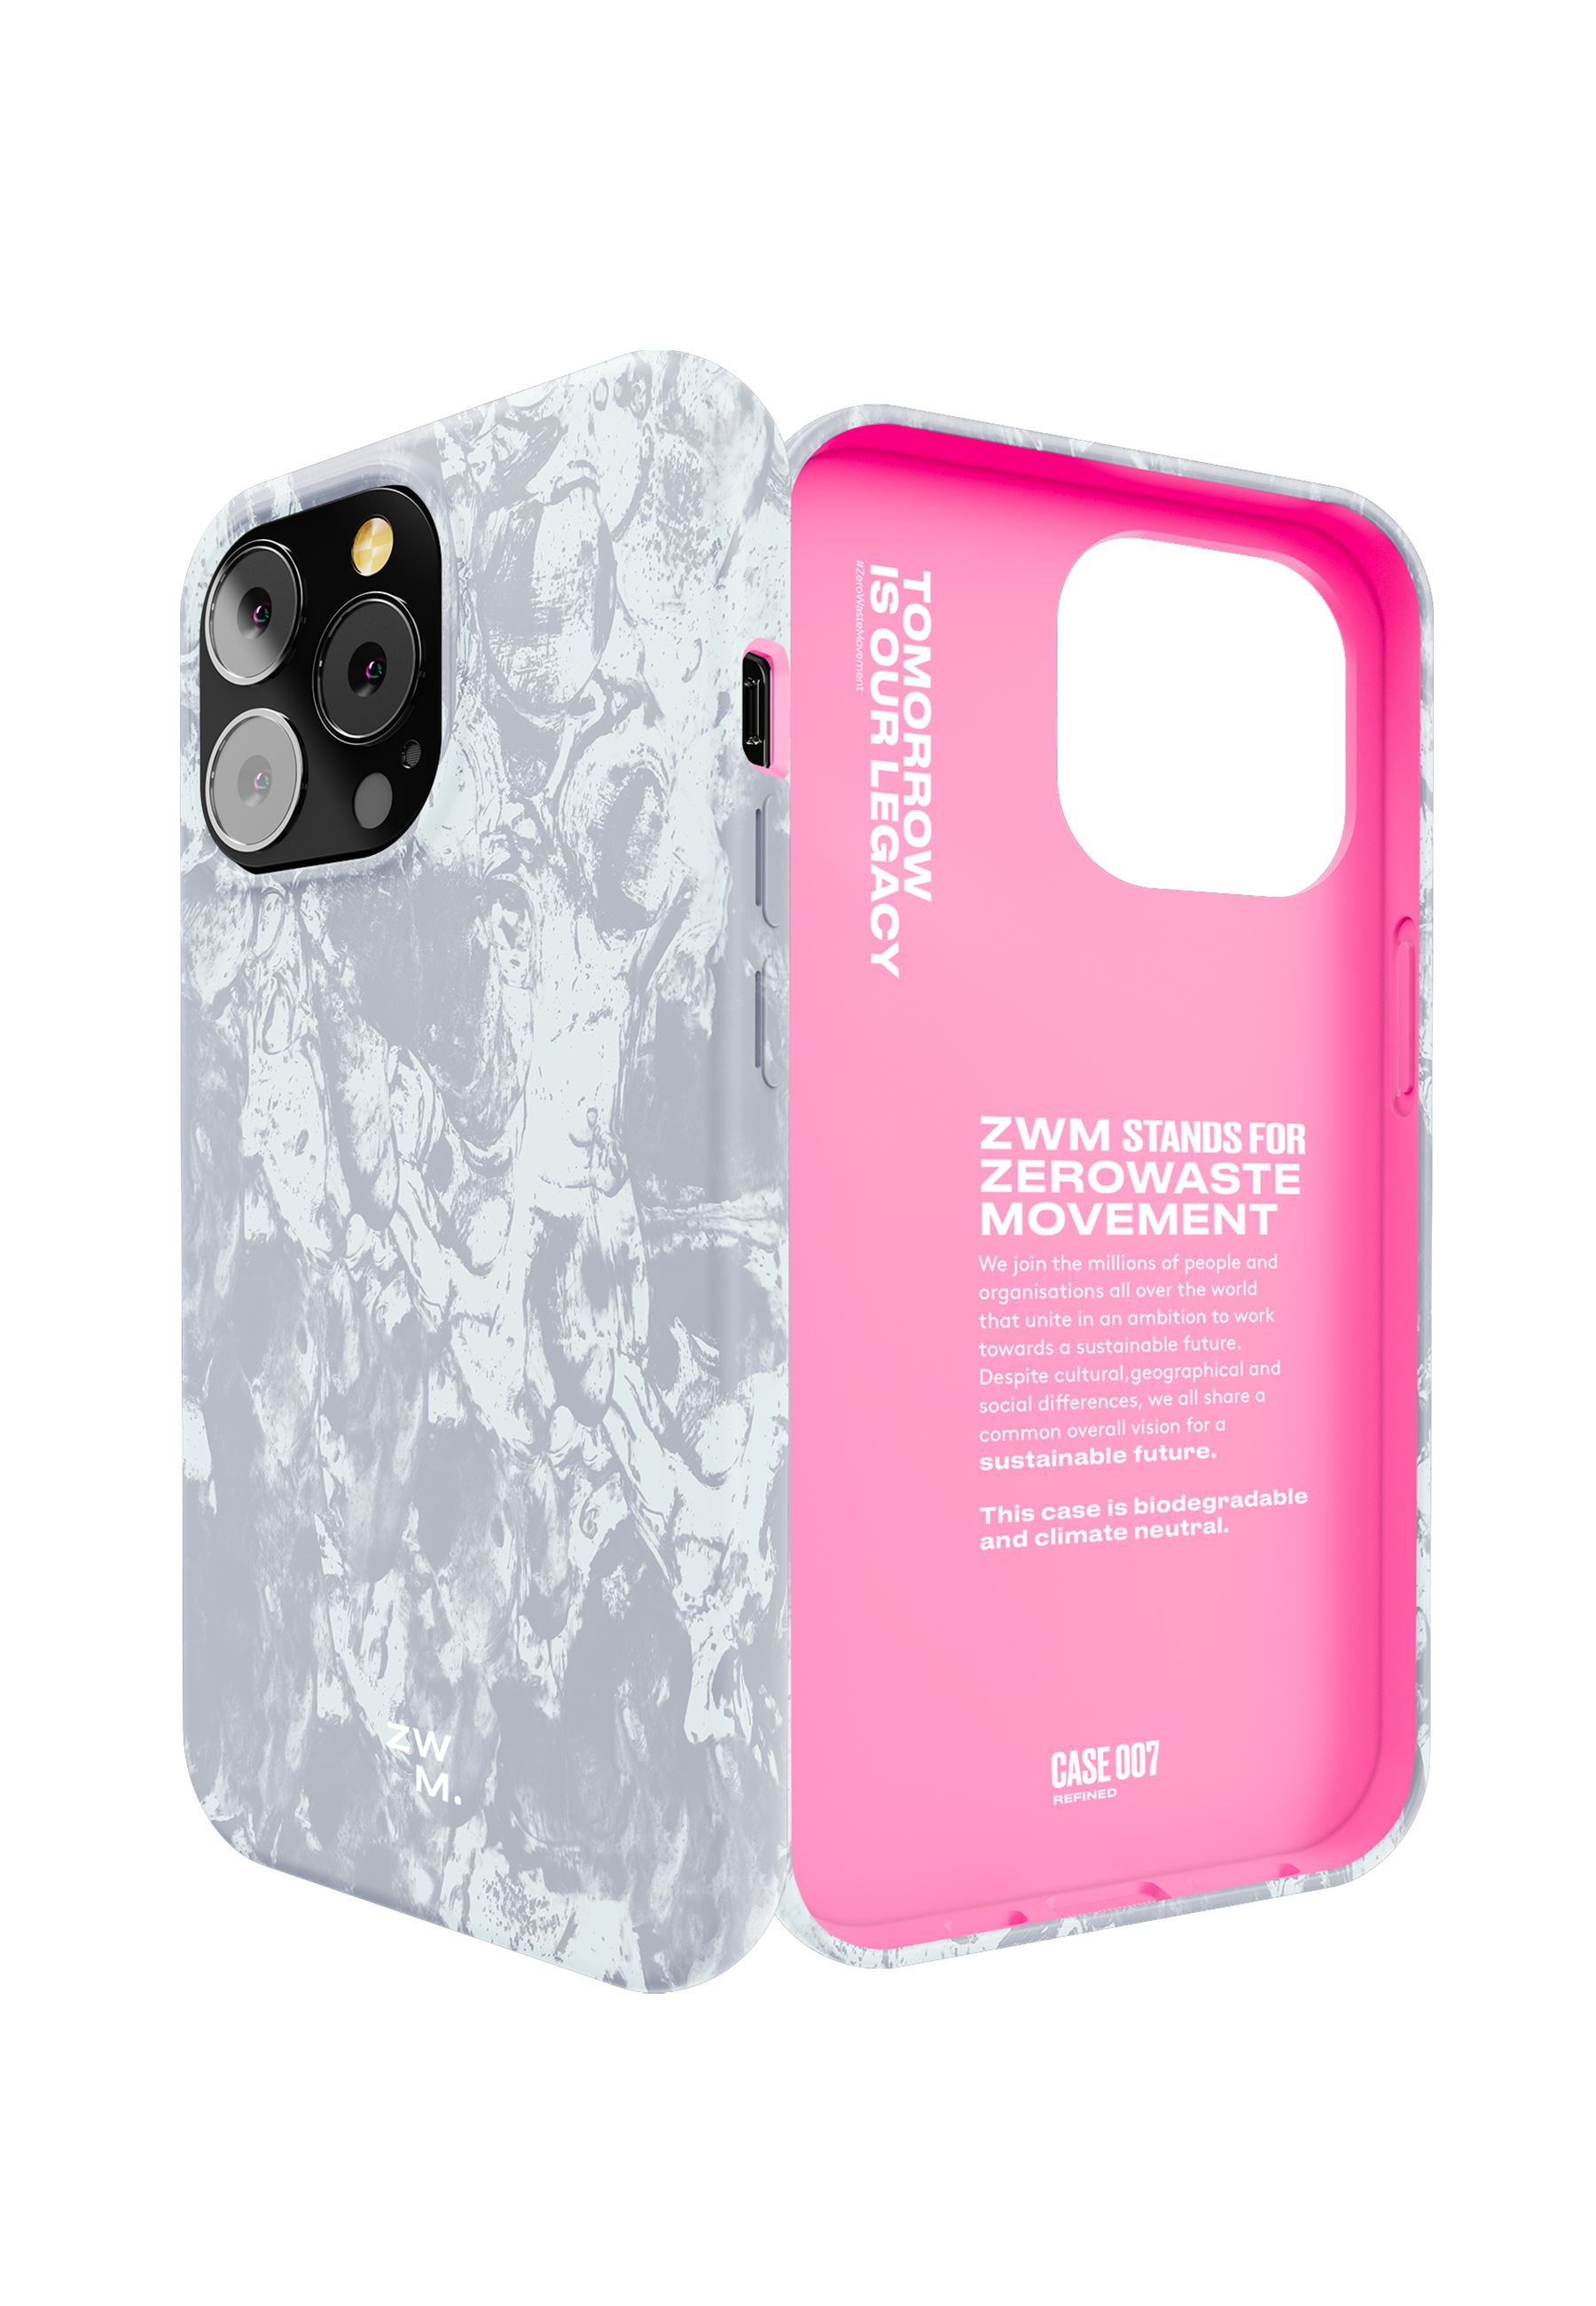 12/12 gray/pink ZWM Pro, Backcover, _13PM, iPhone Apple,